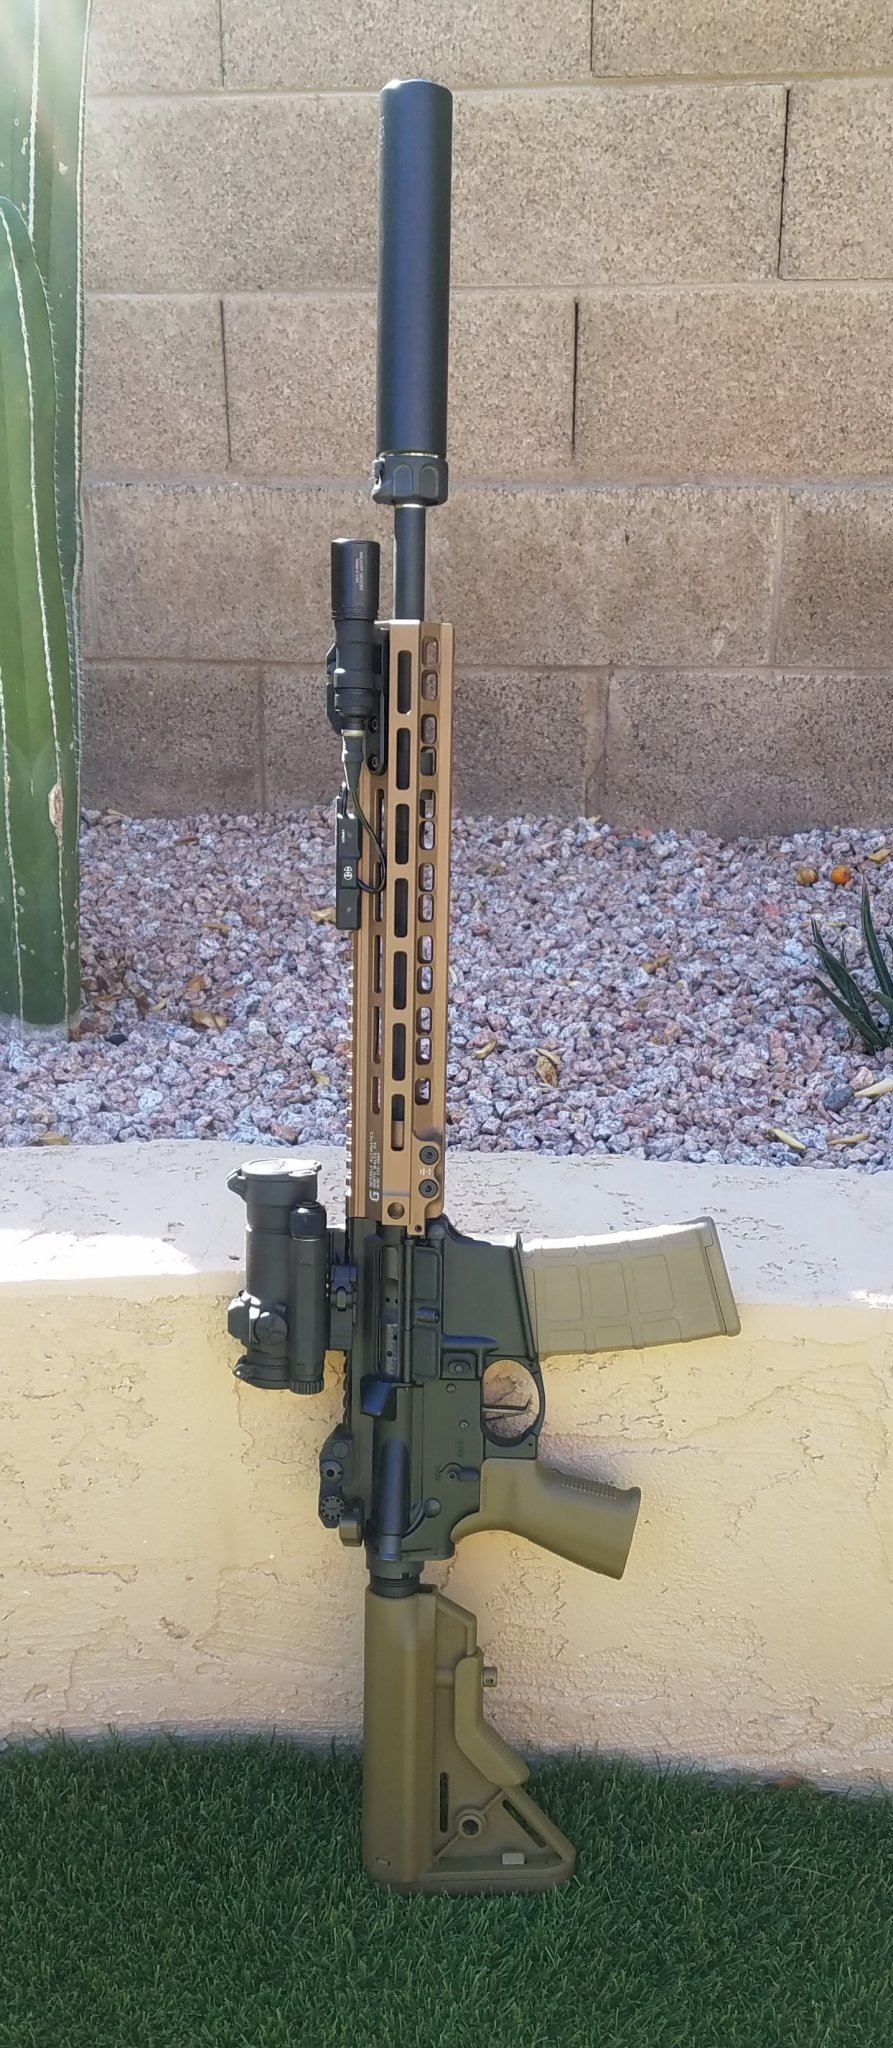 Looking for Suppressed 16 AR15 Pictures